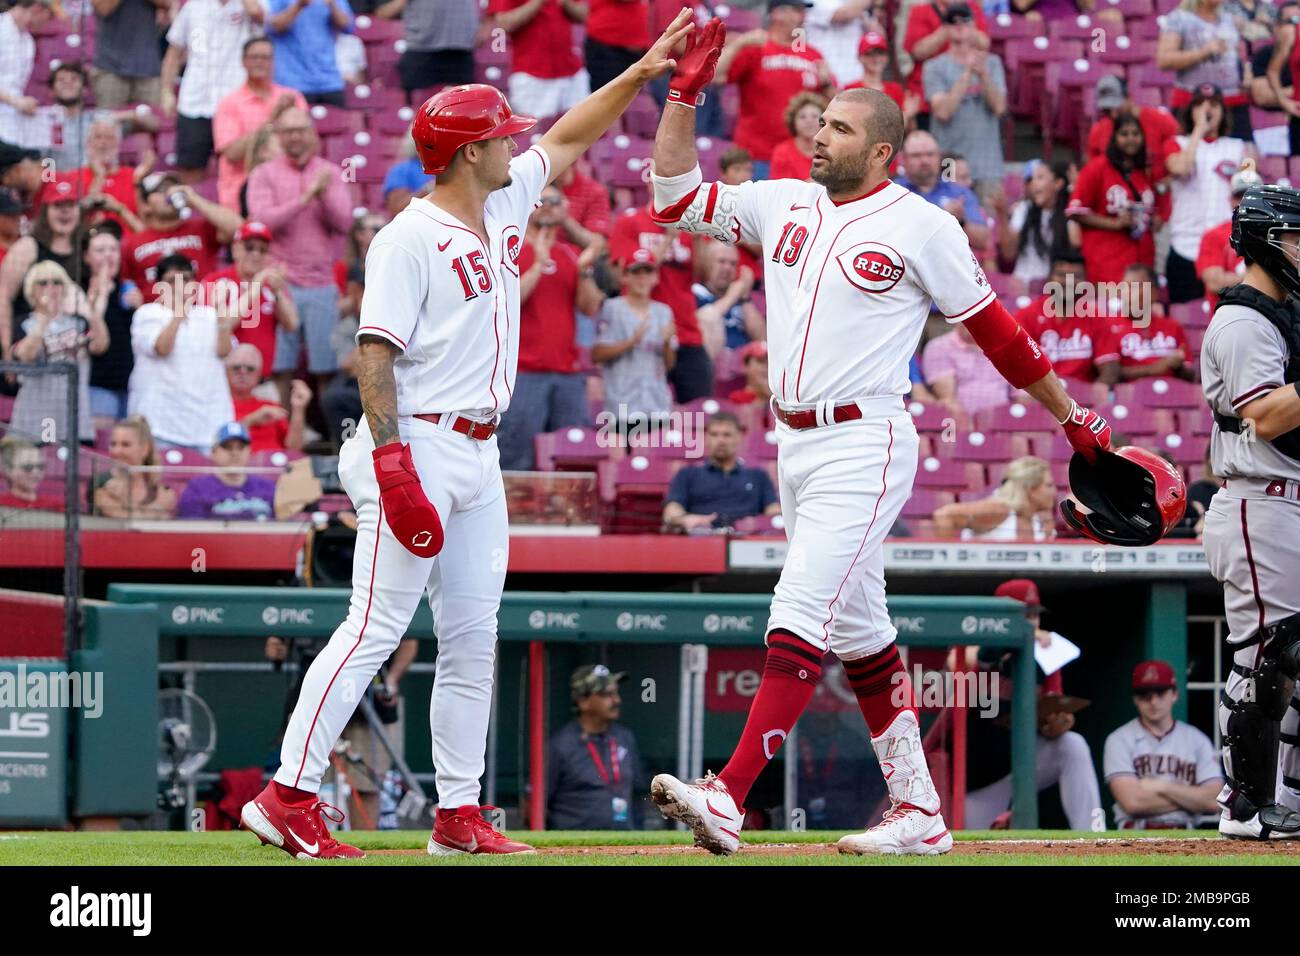 Something to celebrate: Joey Votto, Jesse Winker get Reds offense